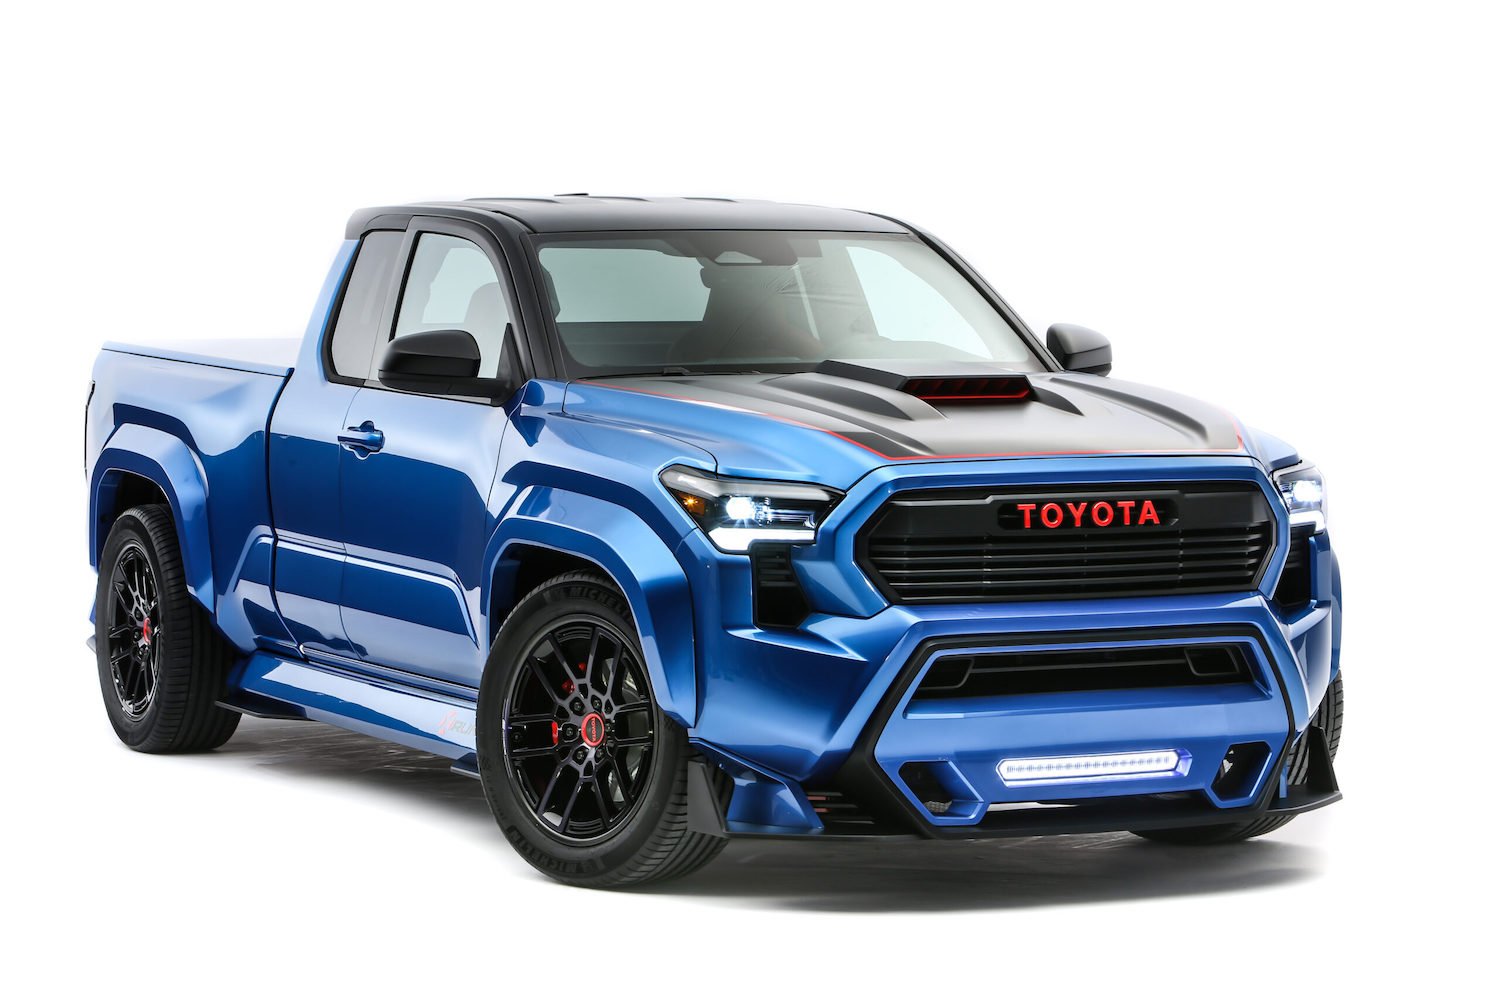 2024 Tacoma Toyota @ SEMA 2023 Preview: "Track or Trail, Your Thrill Awaits" Tacoma_X_Runner_Concept_Toyota_SEMA_2023_Hi-Res_Hero-scaled